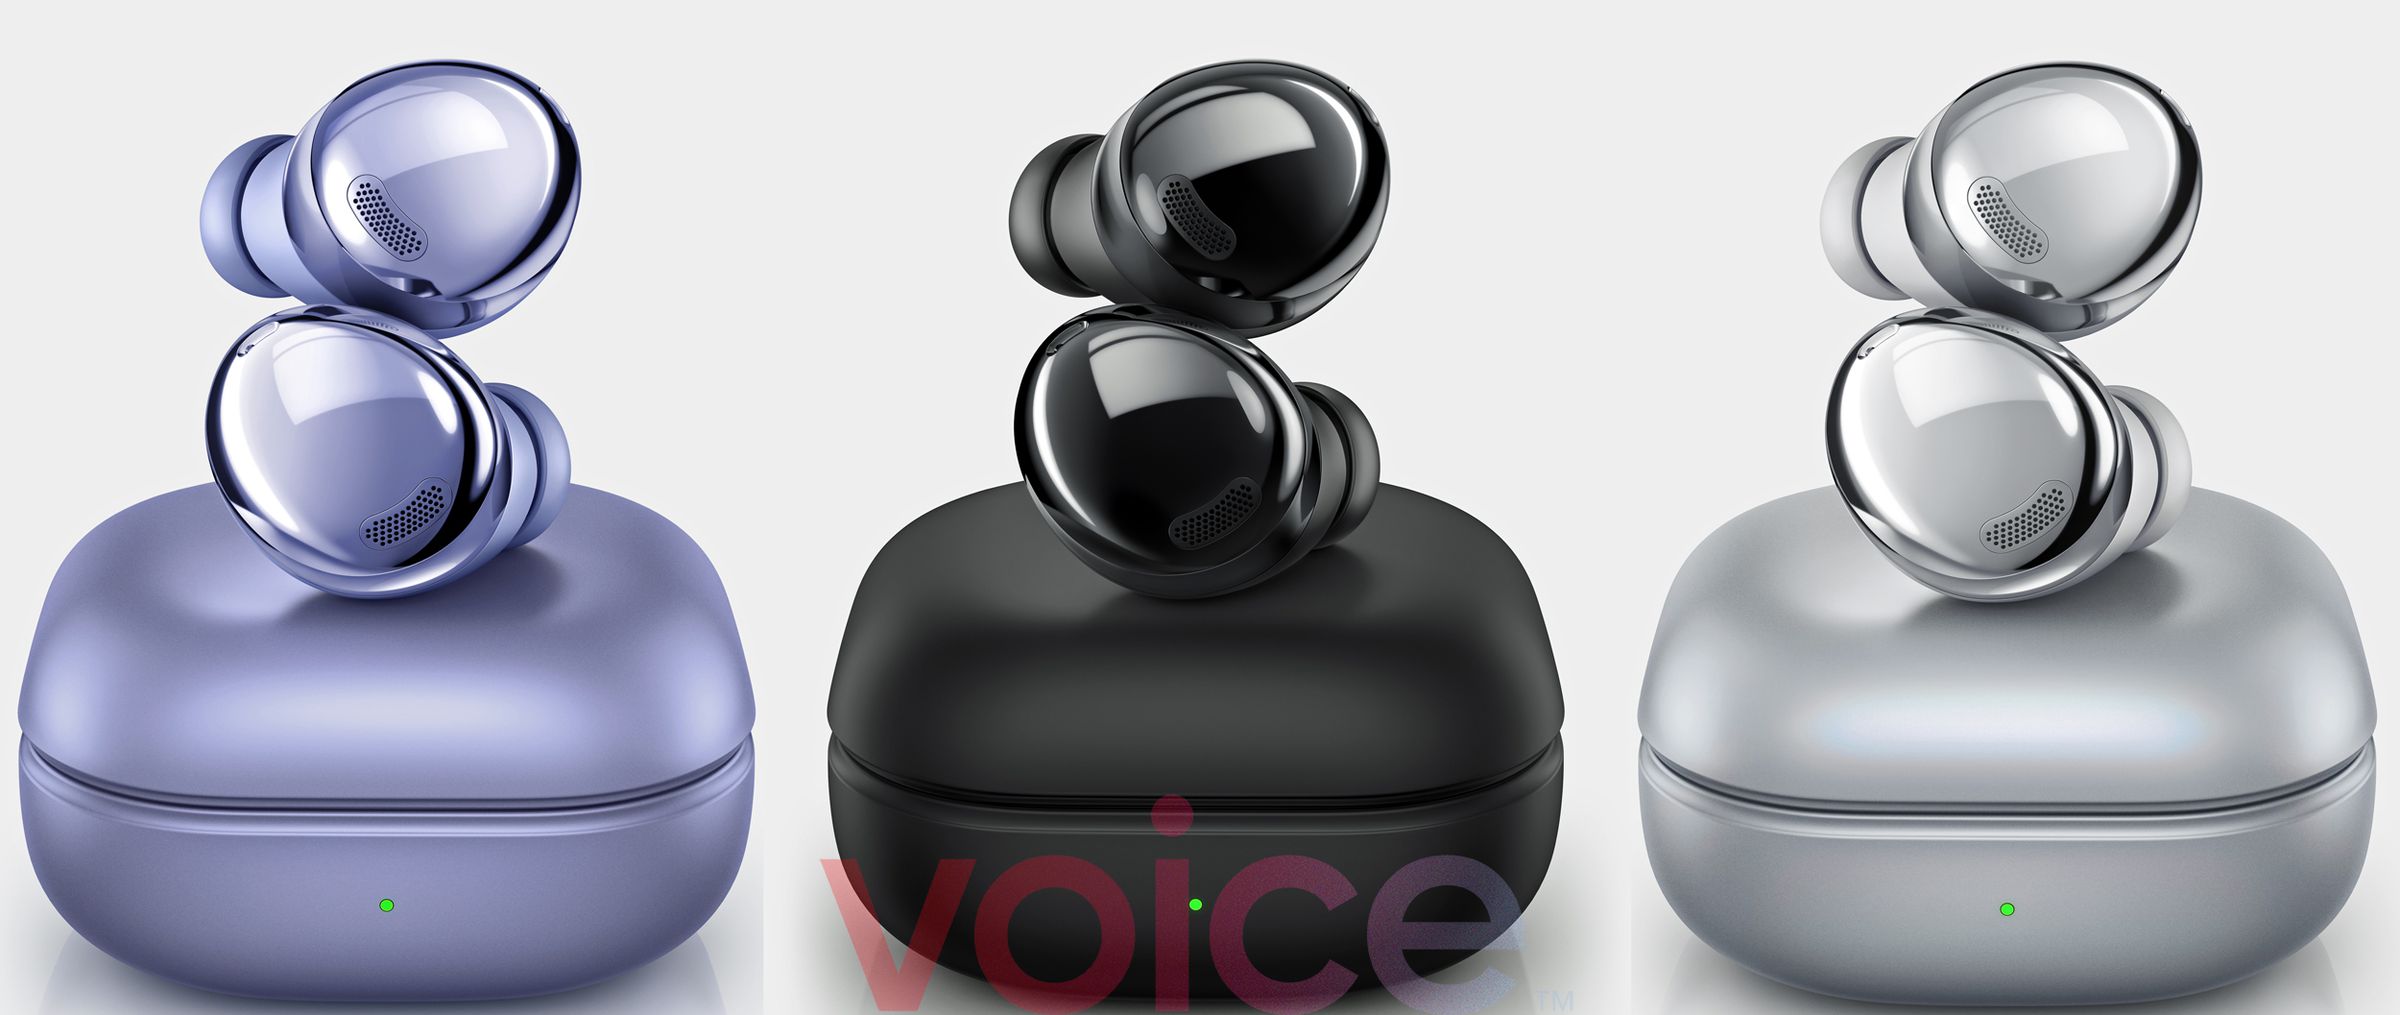 All three Galaxy Buds Pro color options.